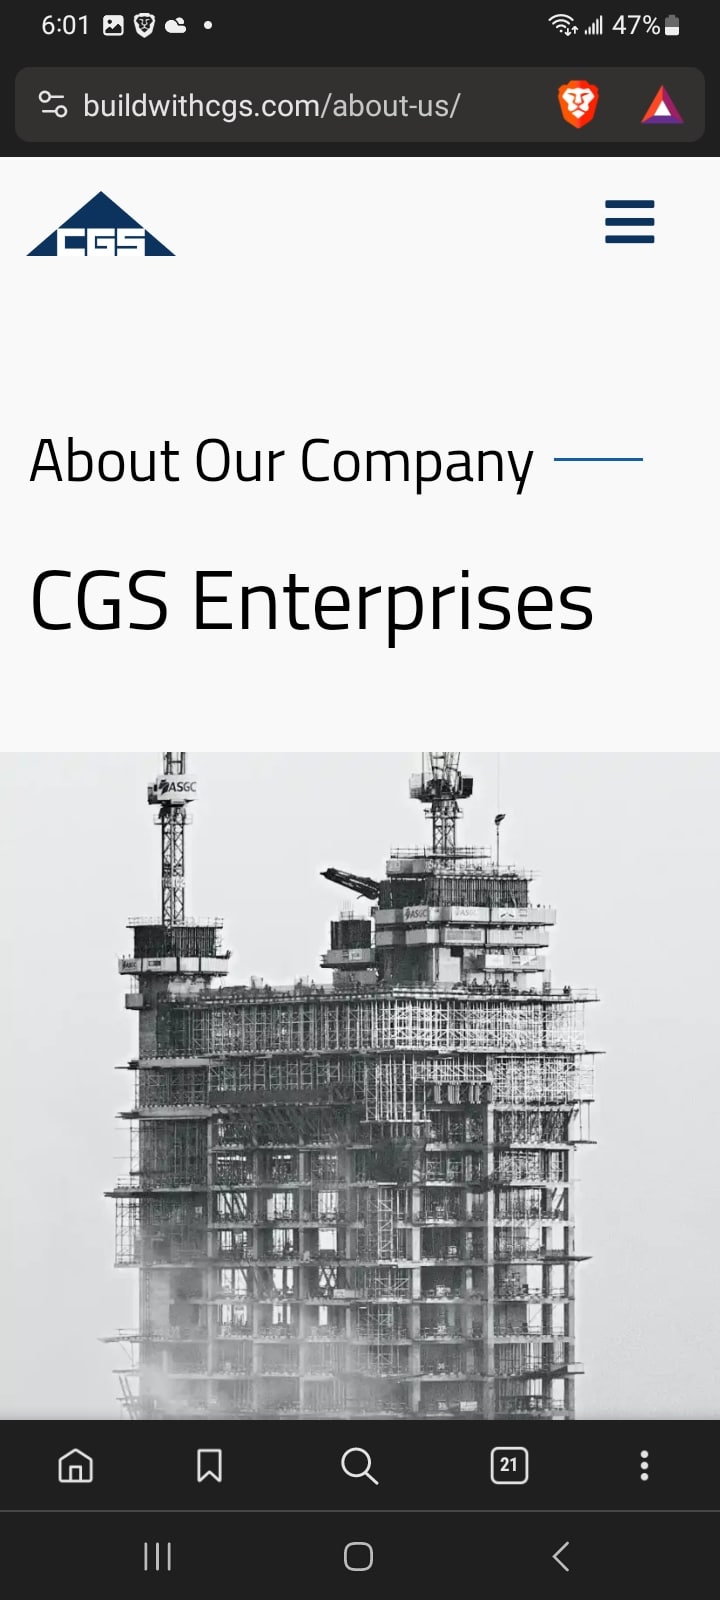 Mobile screenshot taken from the ABOUT page on the website of CGS